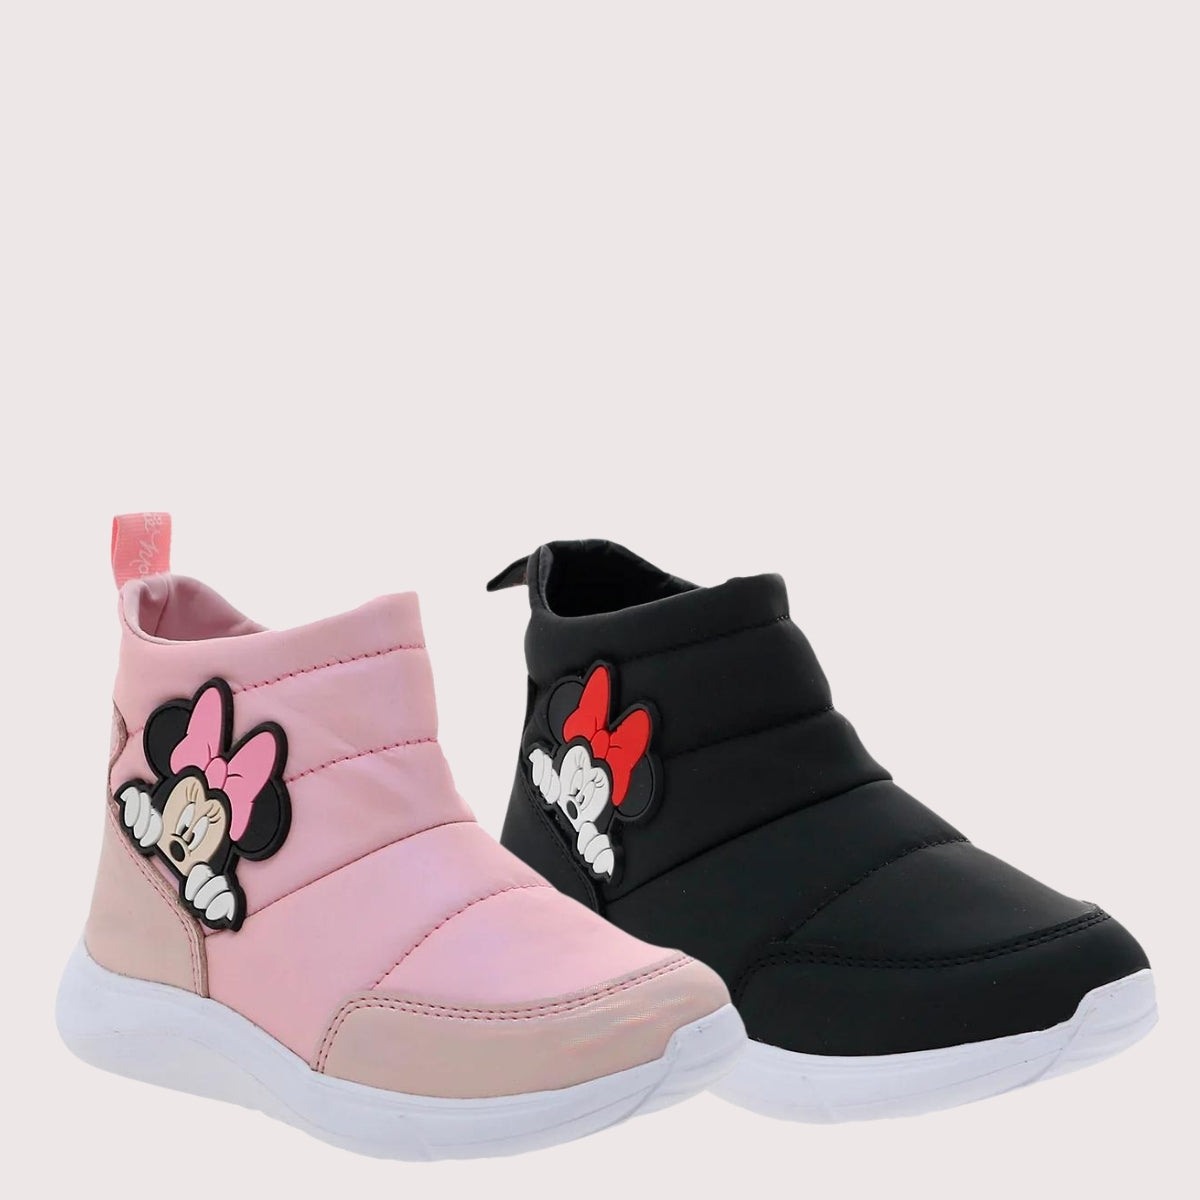 TENIS TIPO BOTA MINNIE MOUSE (18.0 -21.5) -17.5) – LUBERLY